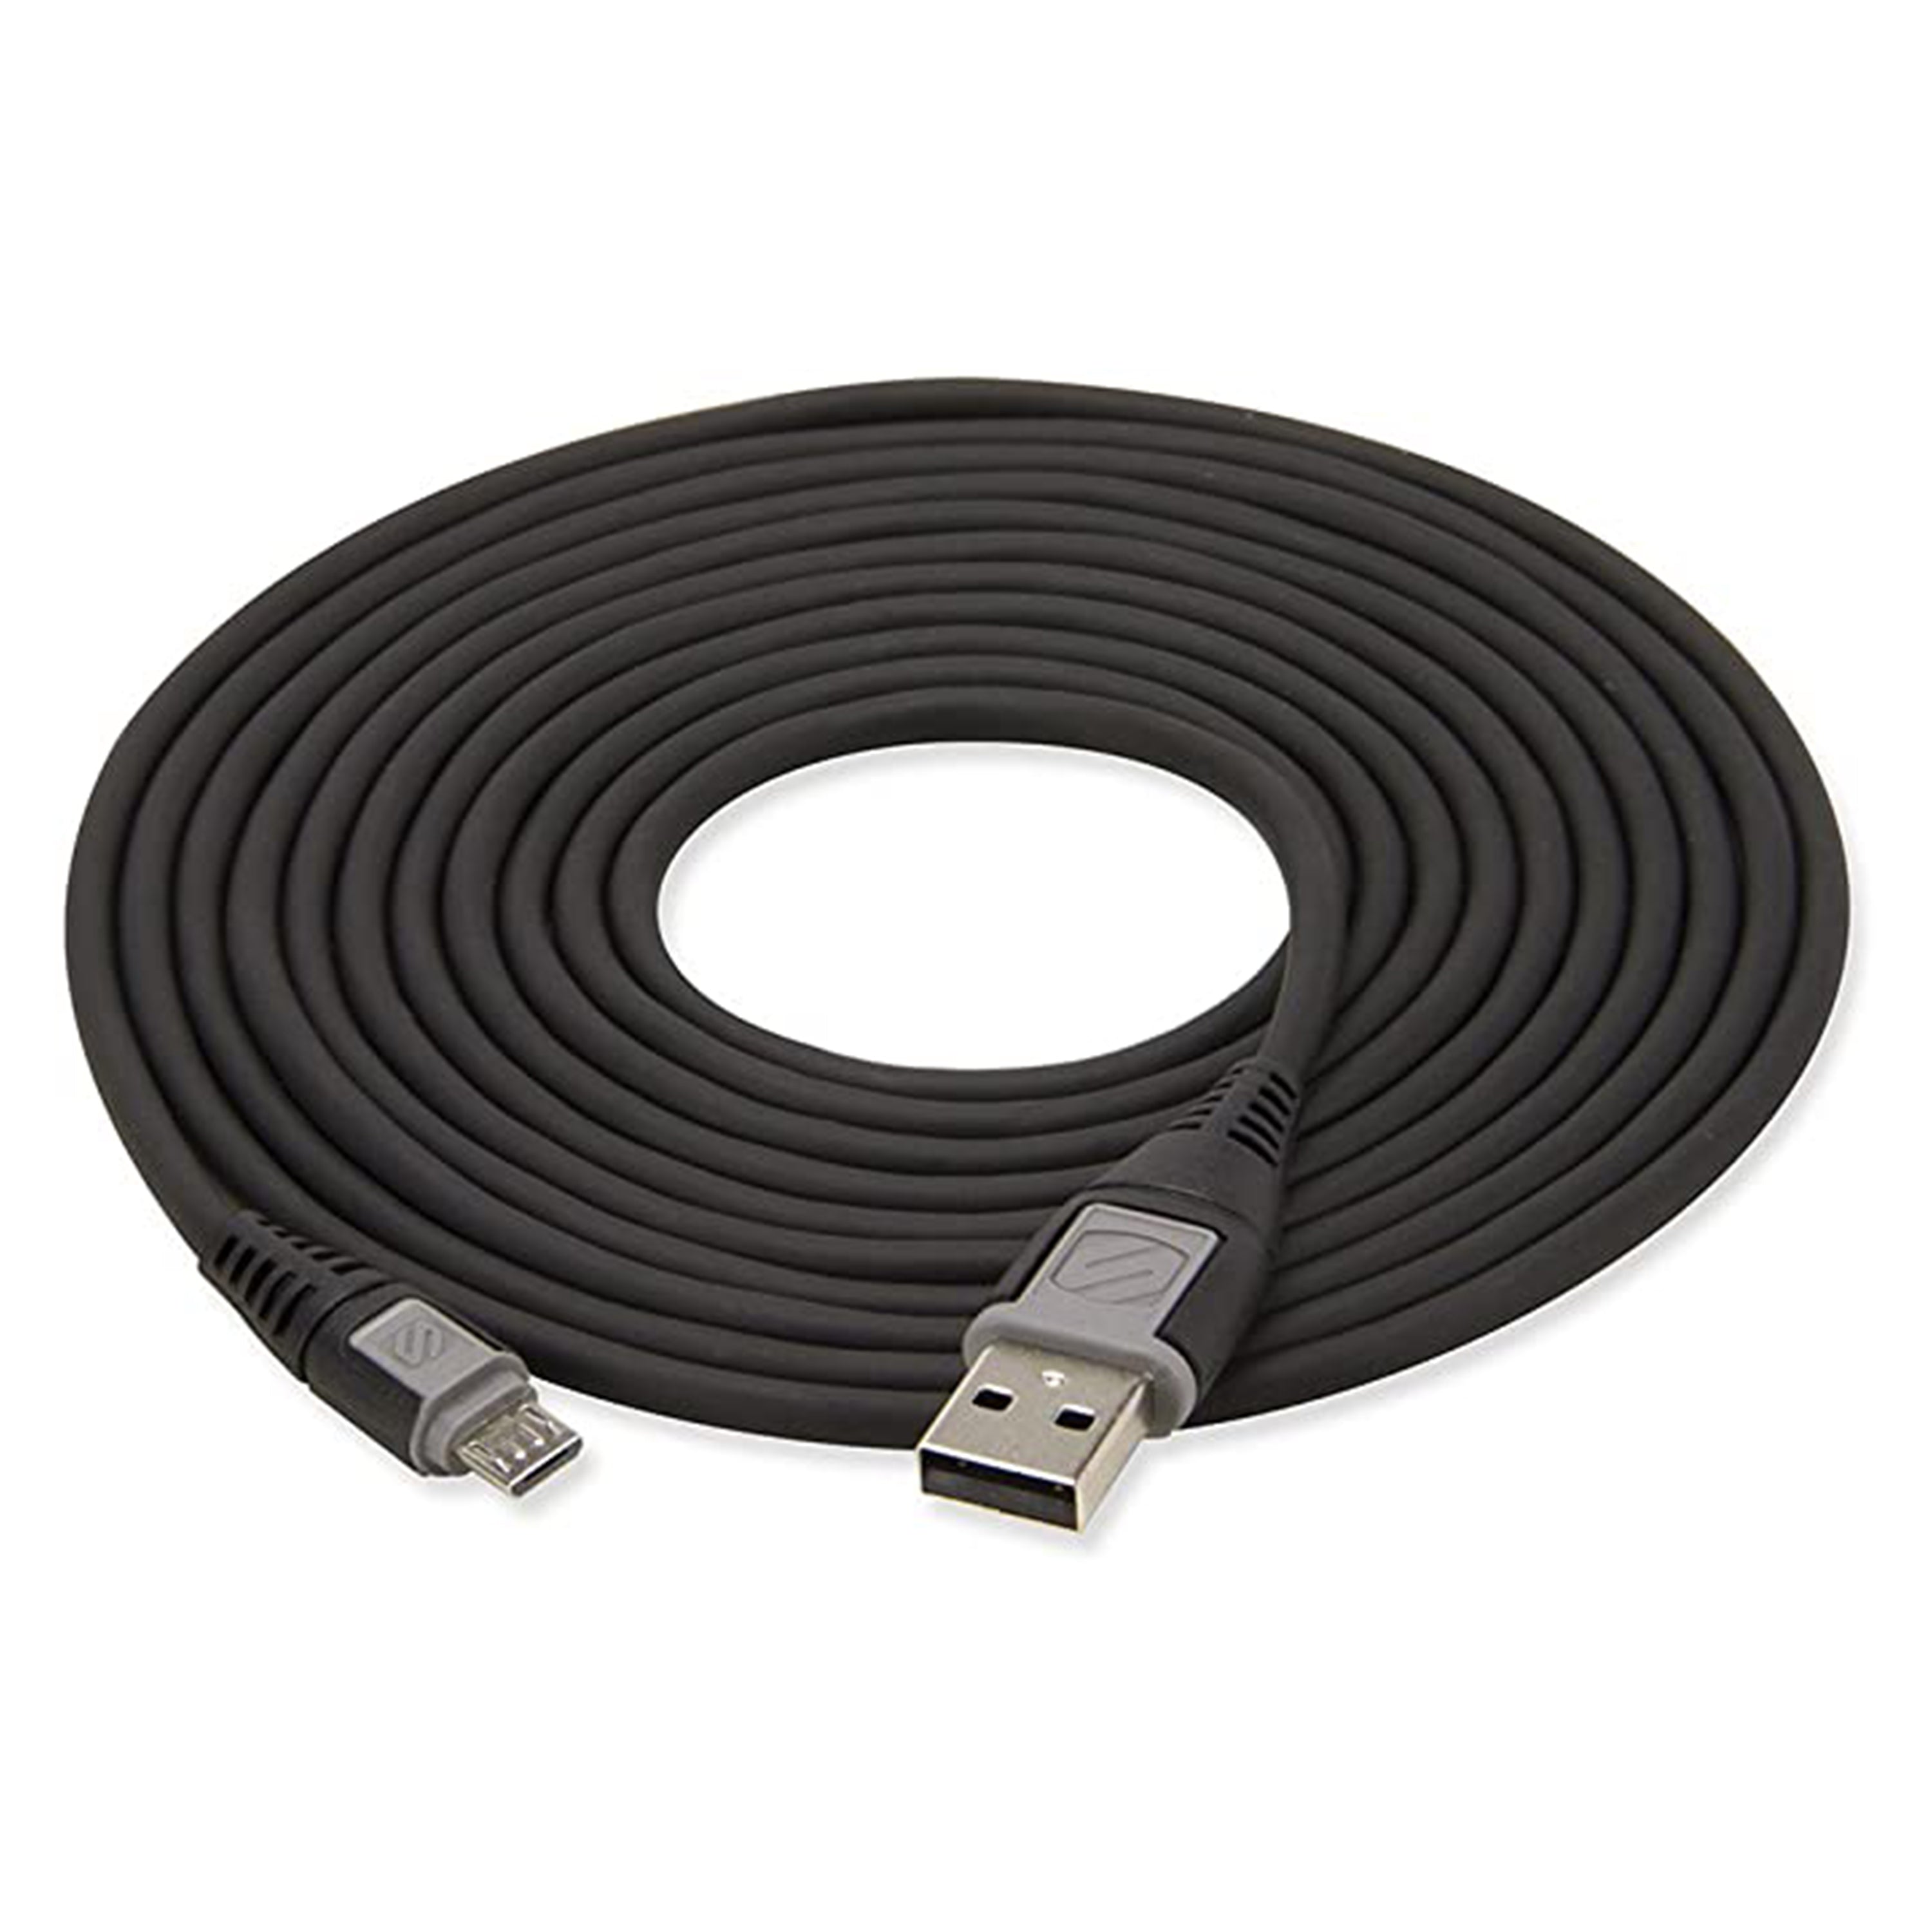 Scosche USBM10, USB Charge And Sync Cable 10' (Black)